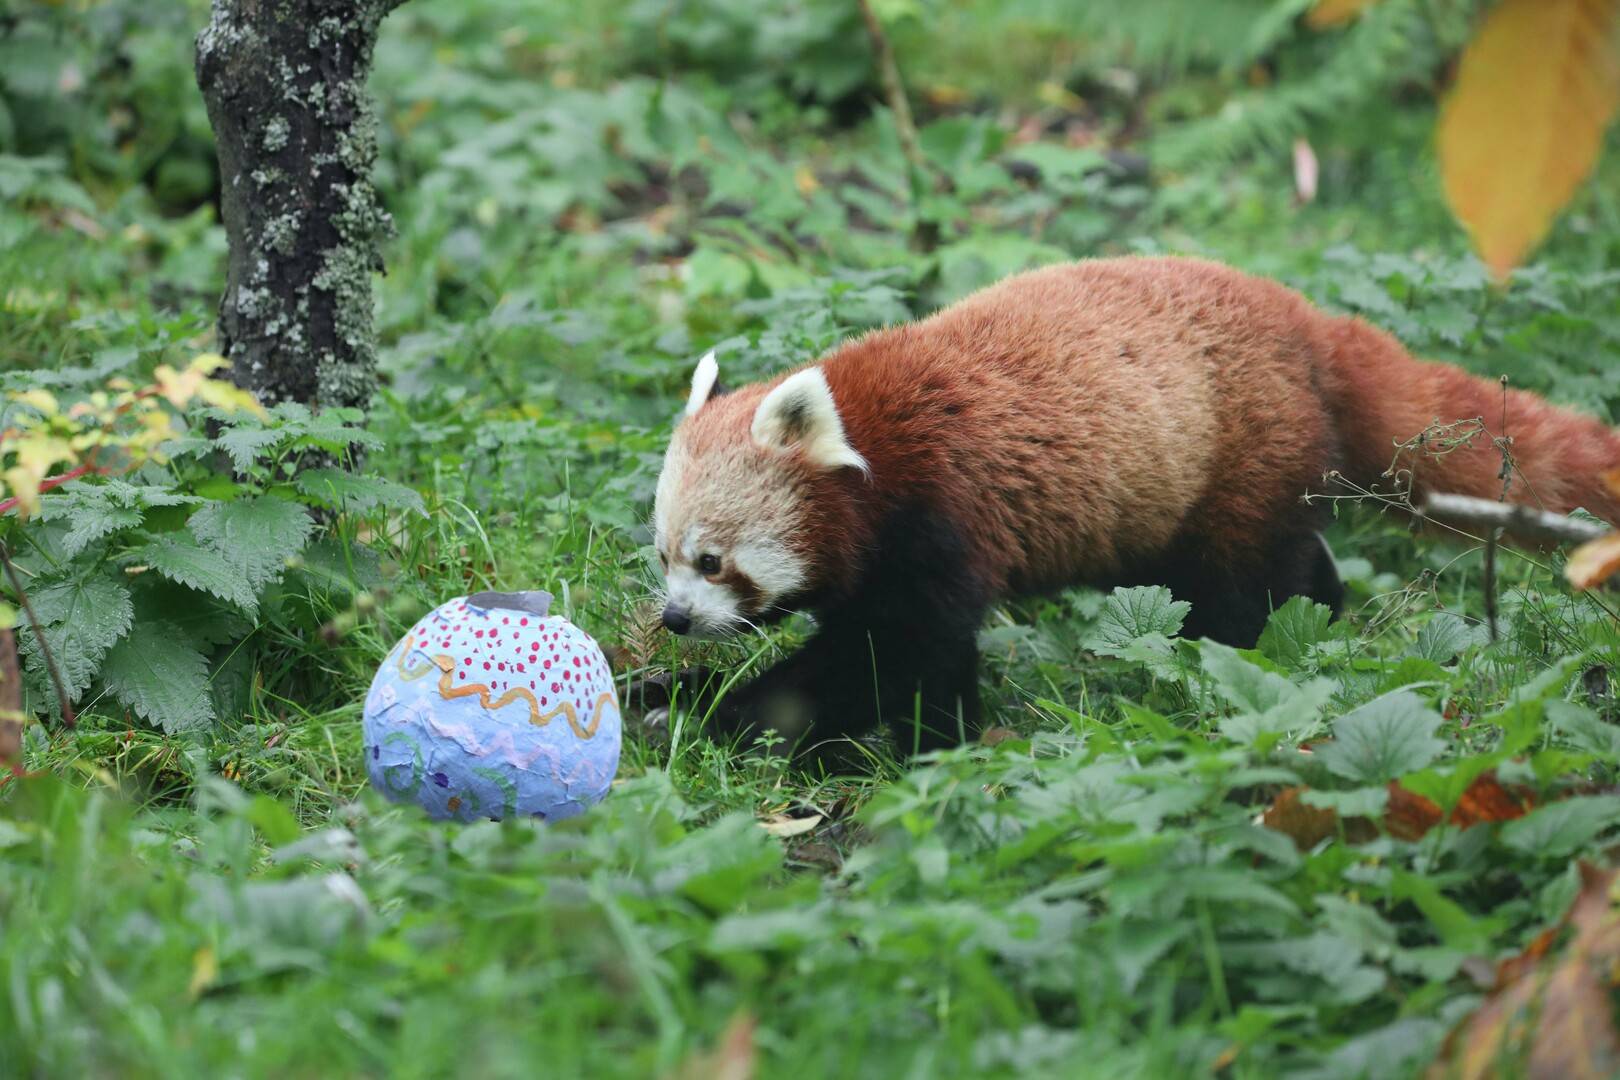 Red panda playing with Easter egg at Edinburgh Zoo, The Royal Zoological Society of Scotland